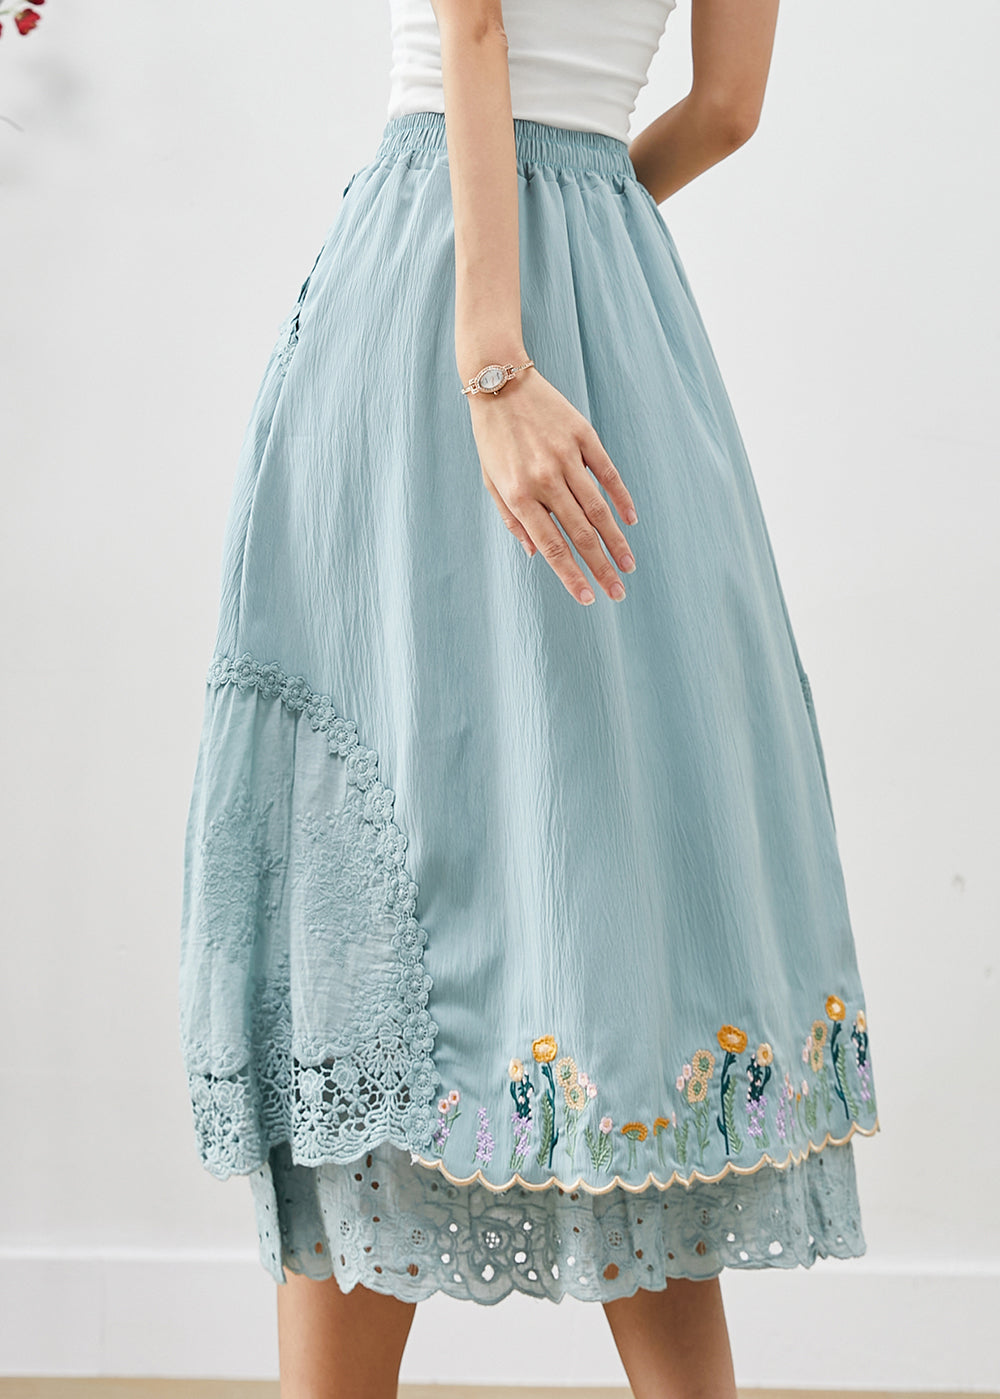 Natural Sky Blue Embroideried Patchwork Cotton Skirt Fall